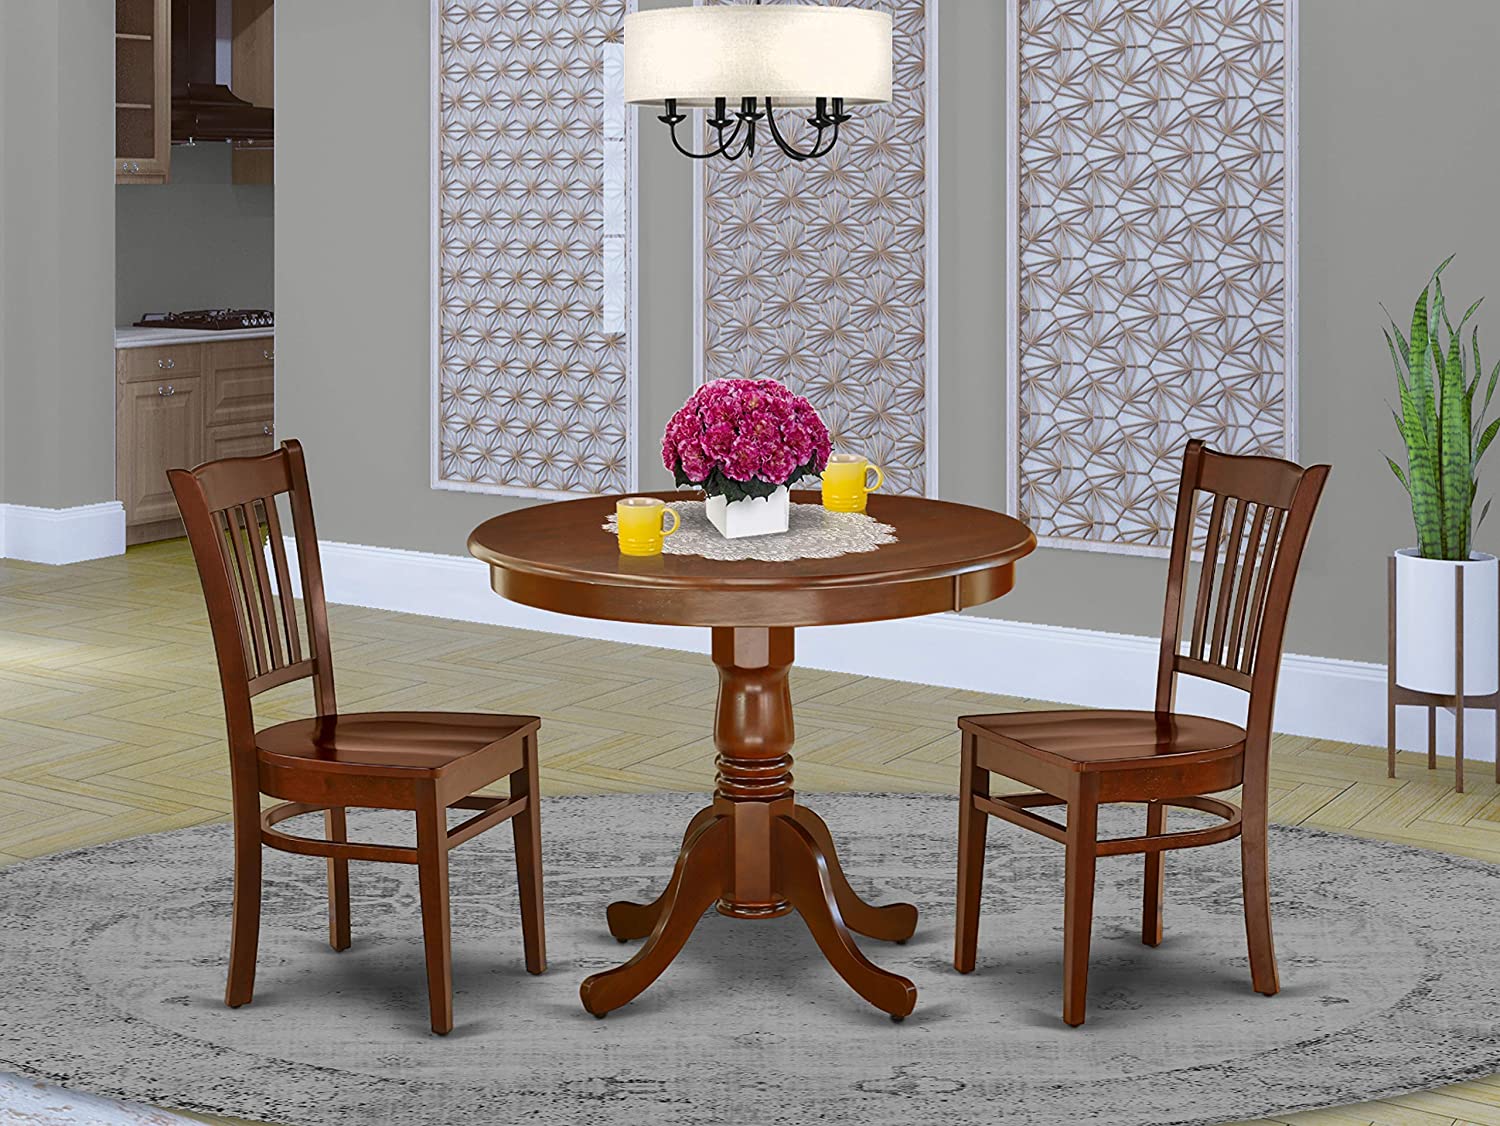 East West Furniture ANGR5-LWH-W Modern Dining Table Set- 4 Excellent Chairs for Dining Room - A Gorgeous Pedestal Dining Table- Wooden Seat and Linen White Dining Table